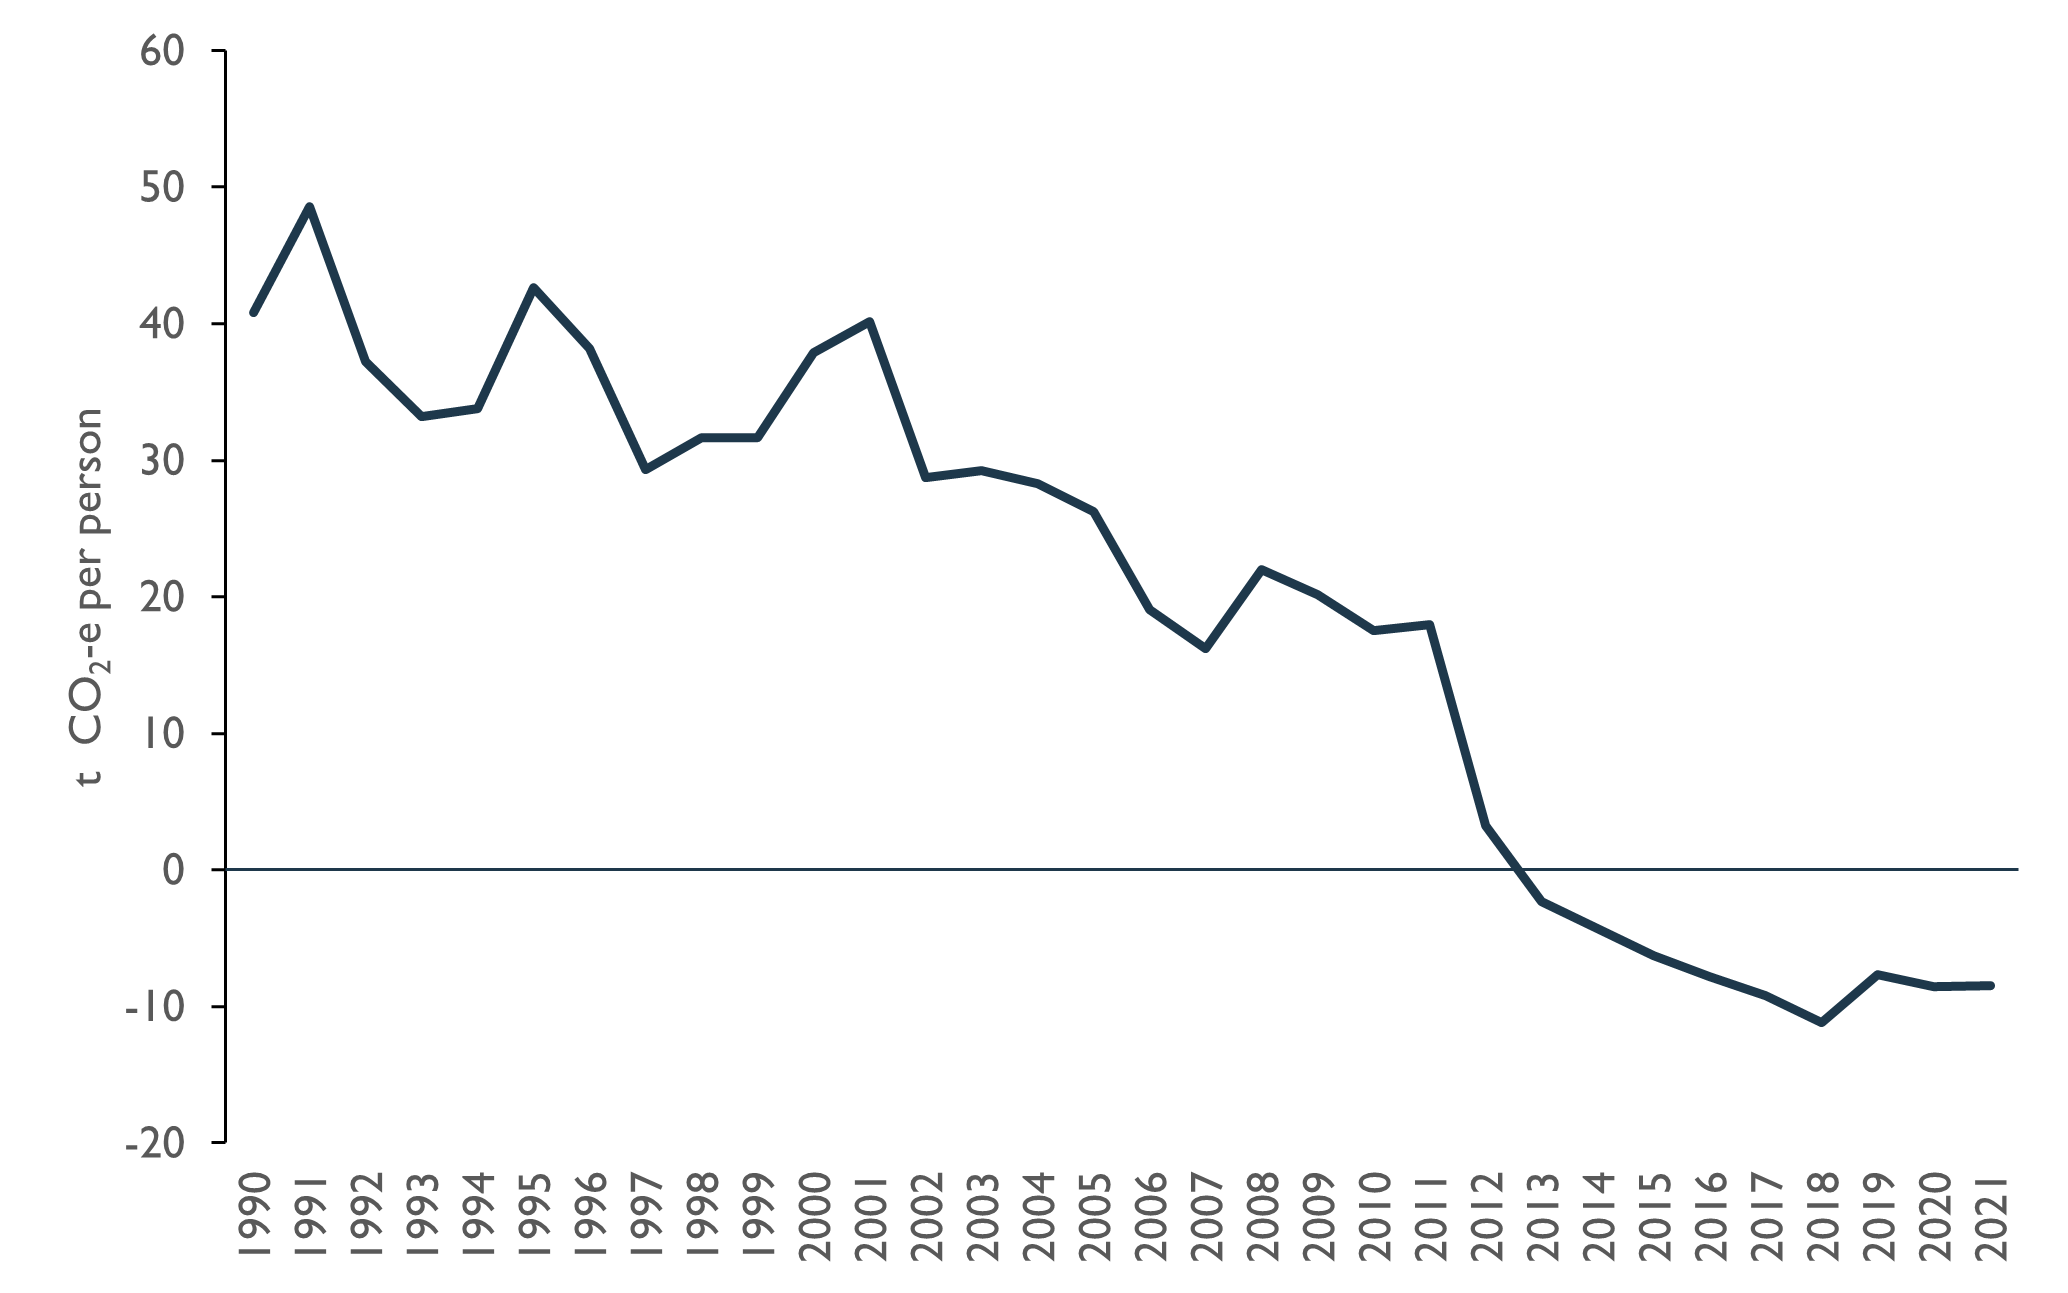 This figure is a line chart showing that Tasmania’s emissions per person have decreased from 48.6 t CO2-e in 1990 to minus 8.5 t CO2-e in 2021, a reduction of 120.7 per cent over 30 years. Emissions per person declined steadily between 1990 and 2011, from 2011 they drop sharply to 2021.